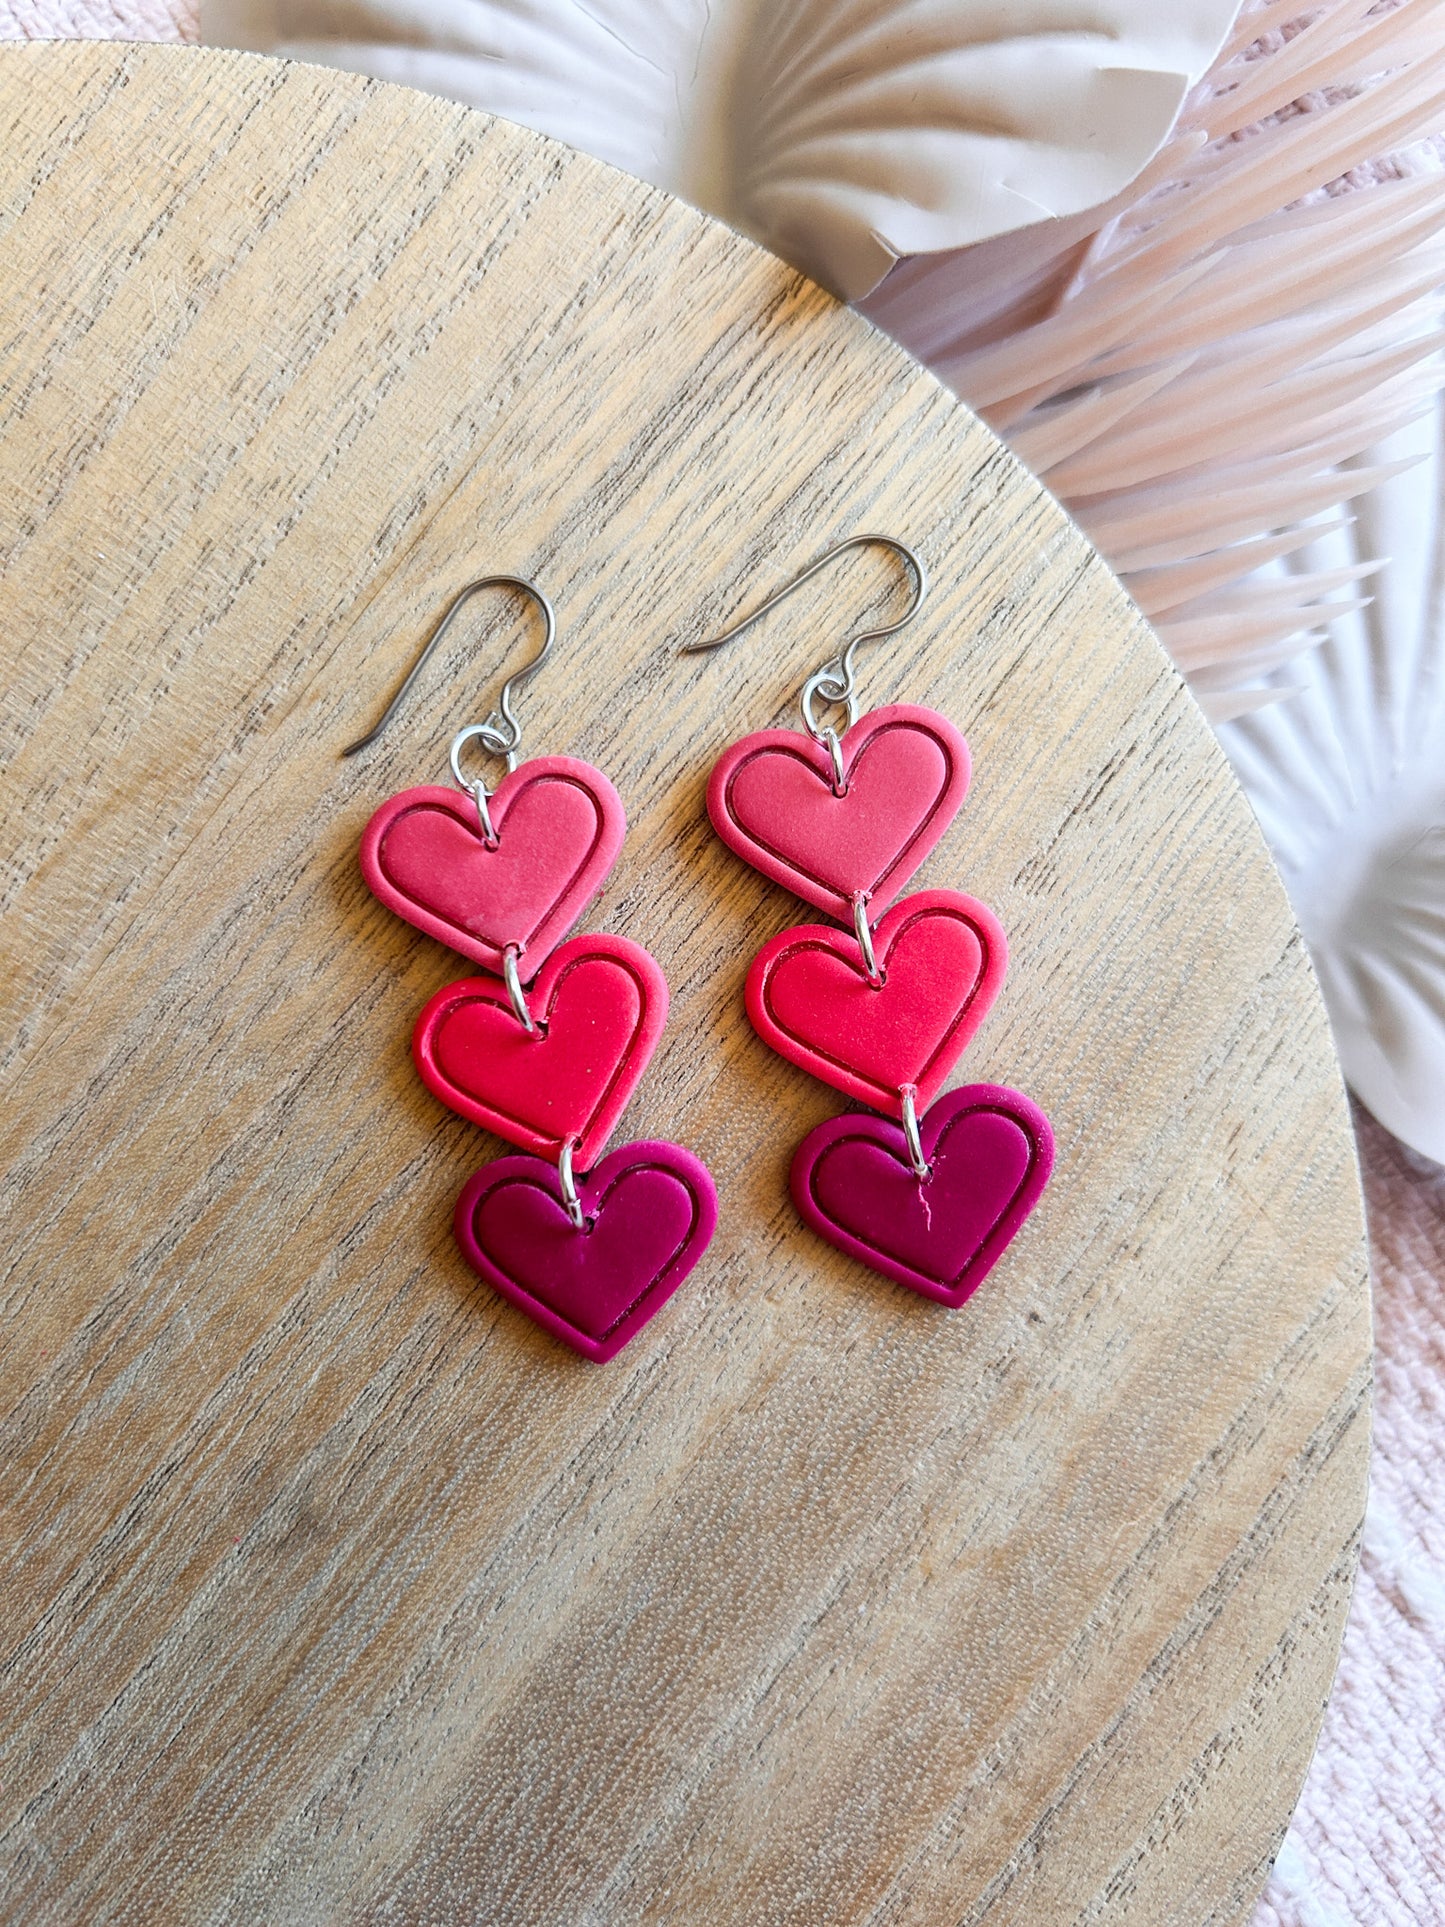 Cute Valentine's Day Heart Dangles | Galentine's Day Earrings | Pink Earrings | Lightweight | Gal Pal Gifts